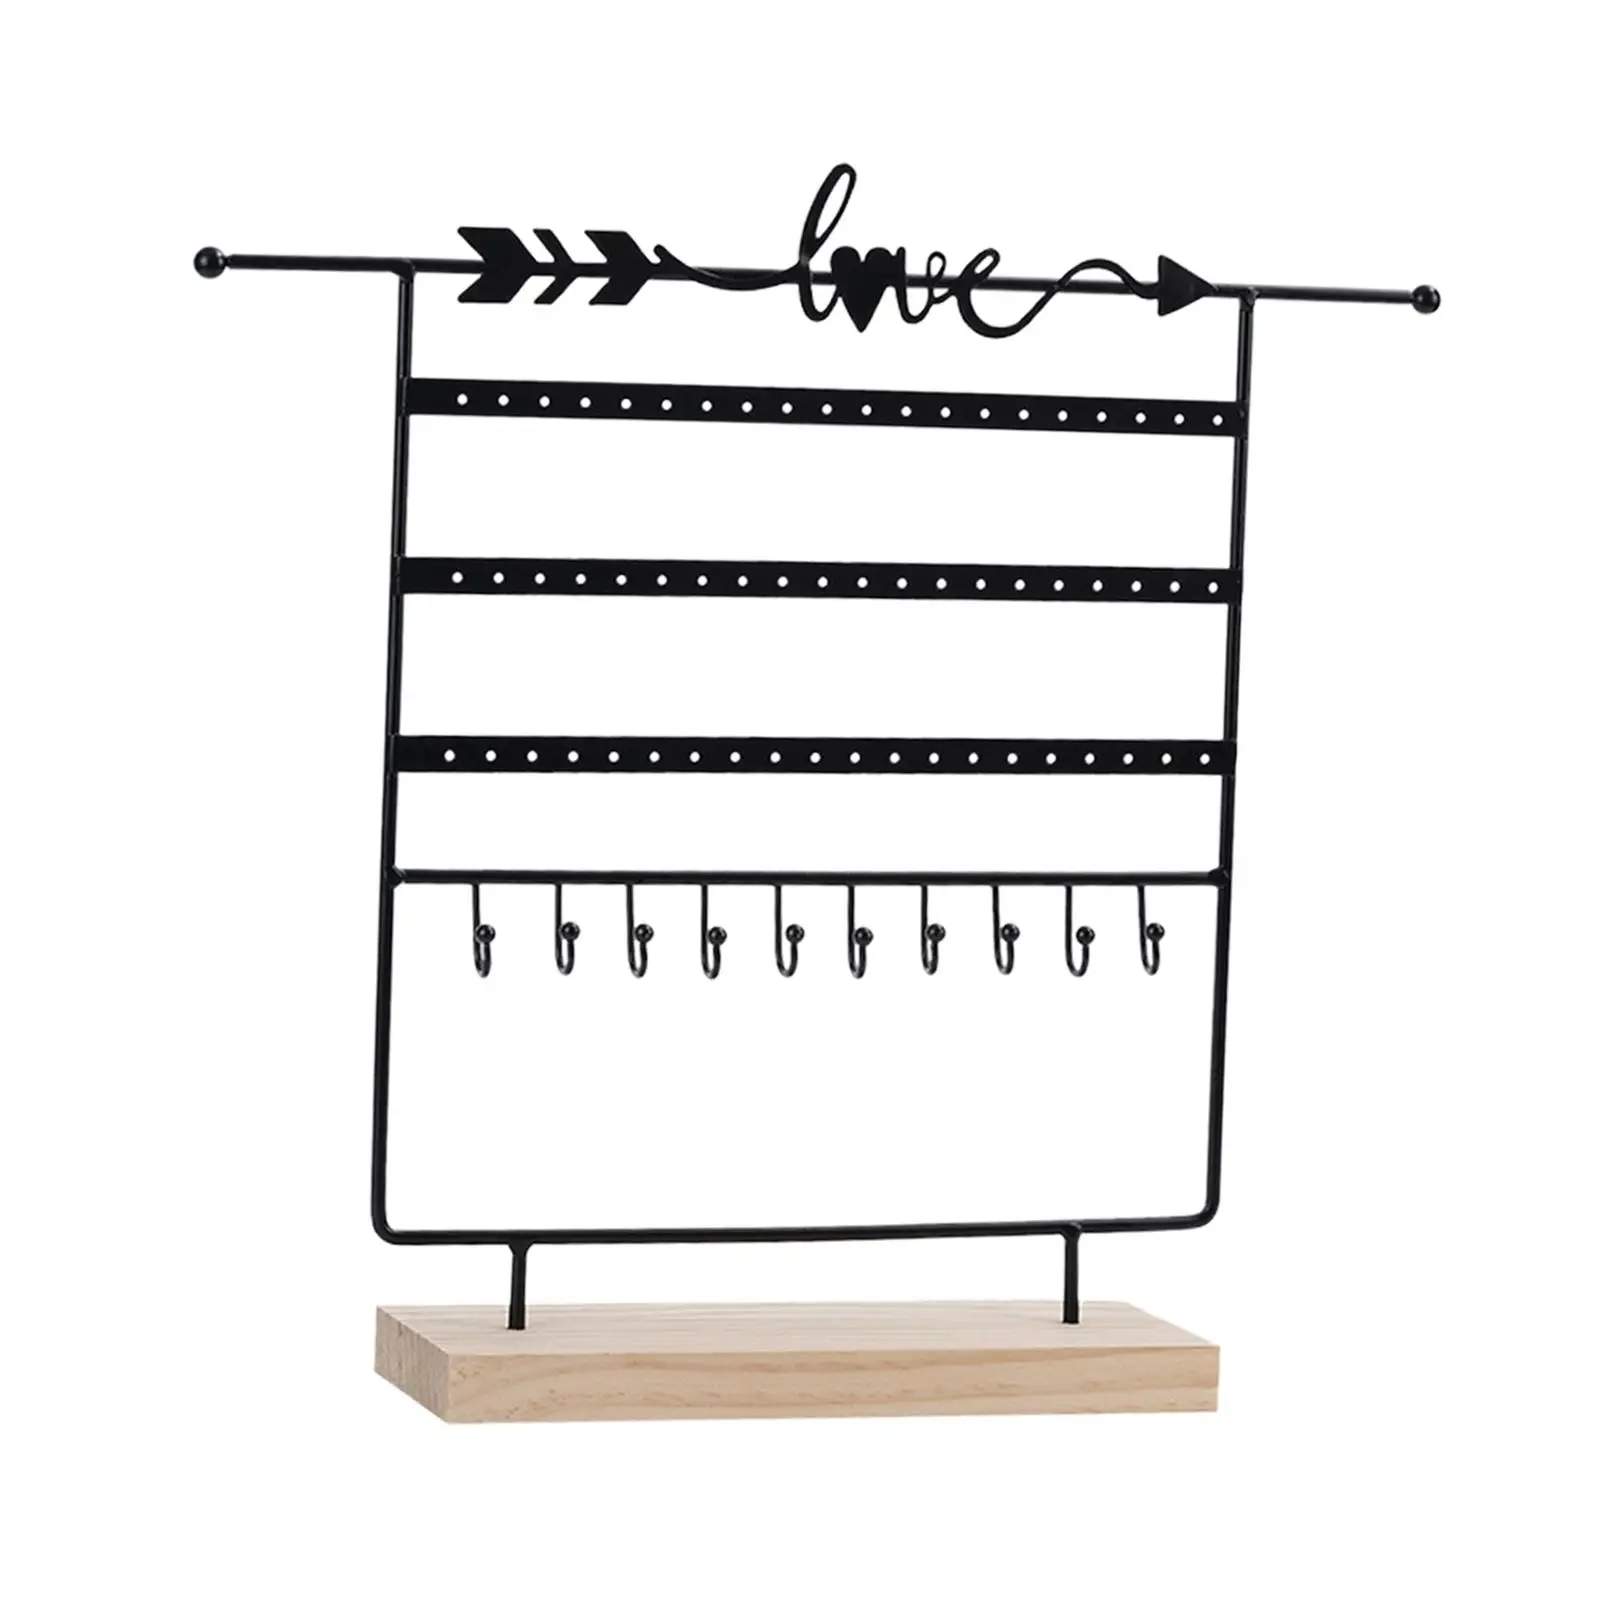 Jewelry Earring Organizer Holder with Wooden Base Decoration for Dresser Bedroom